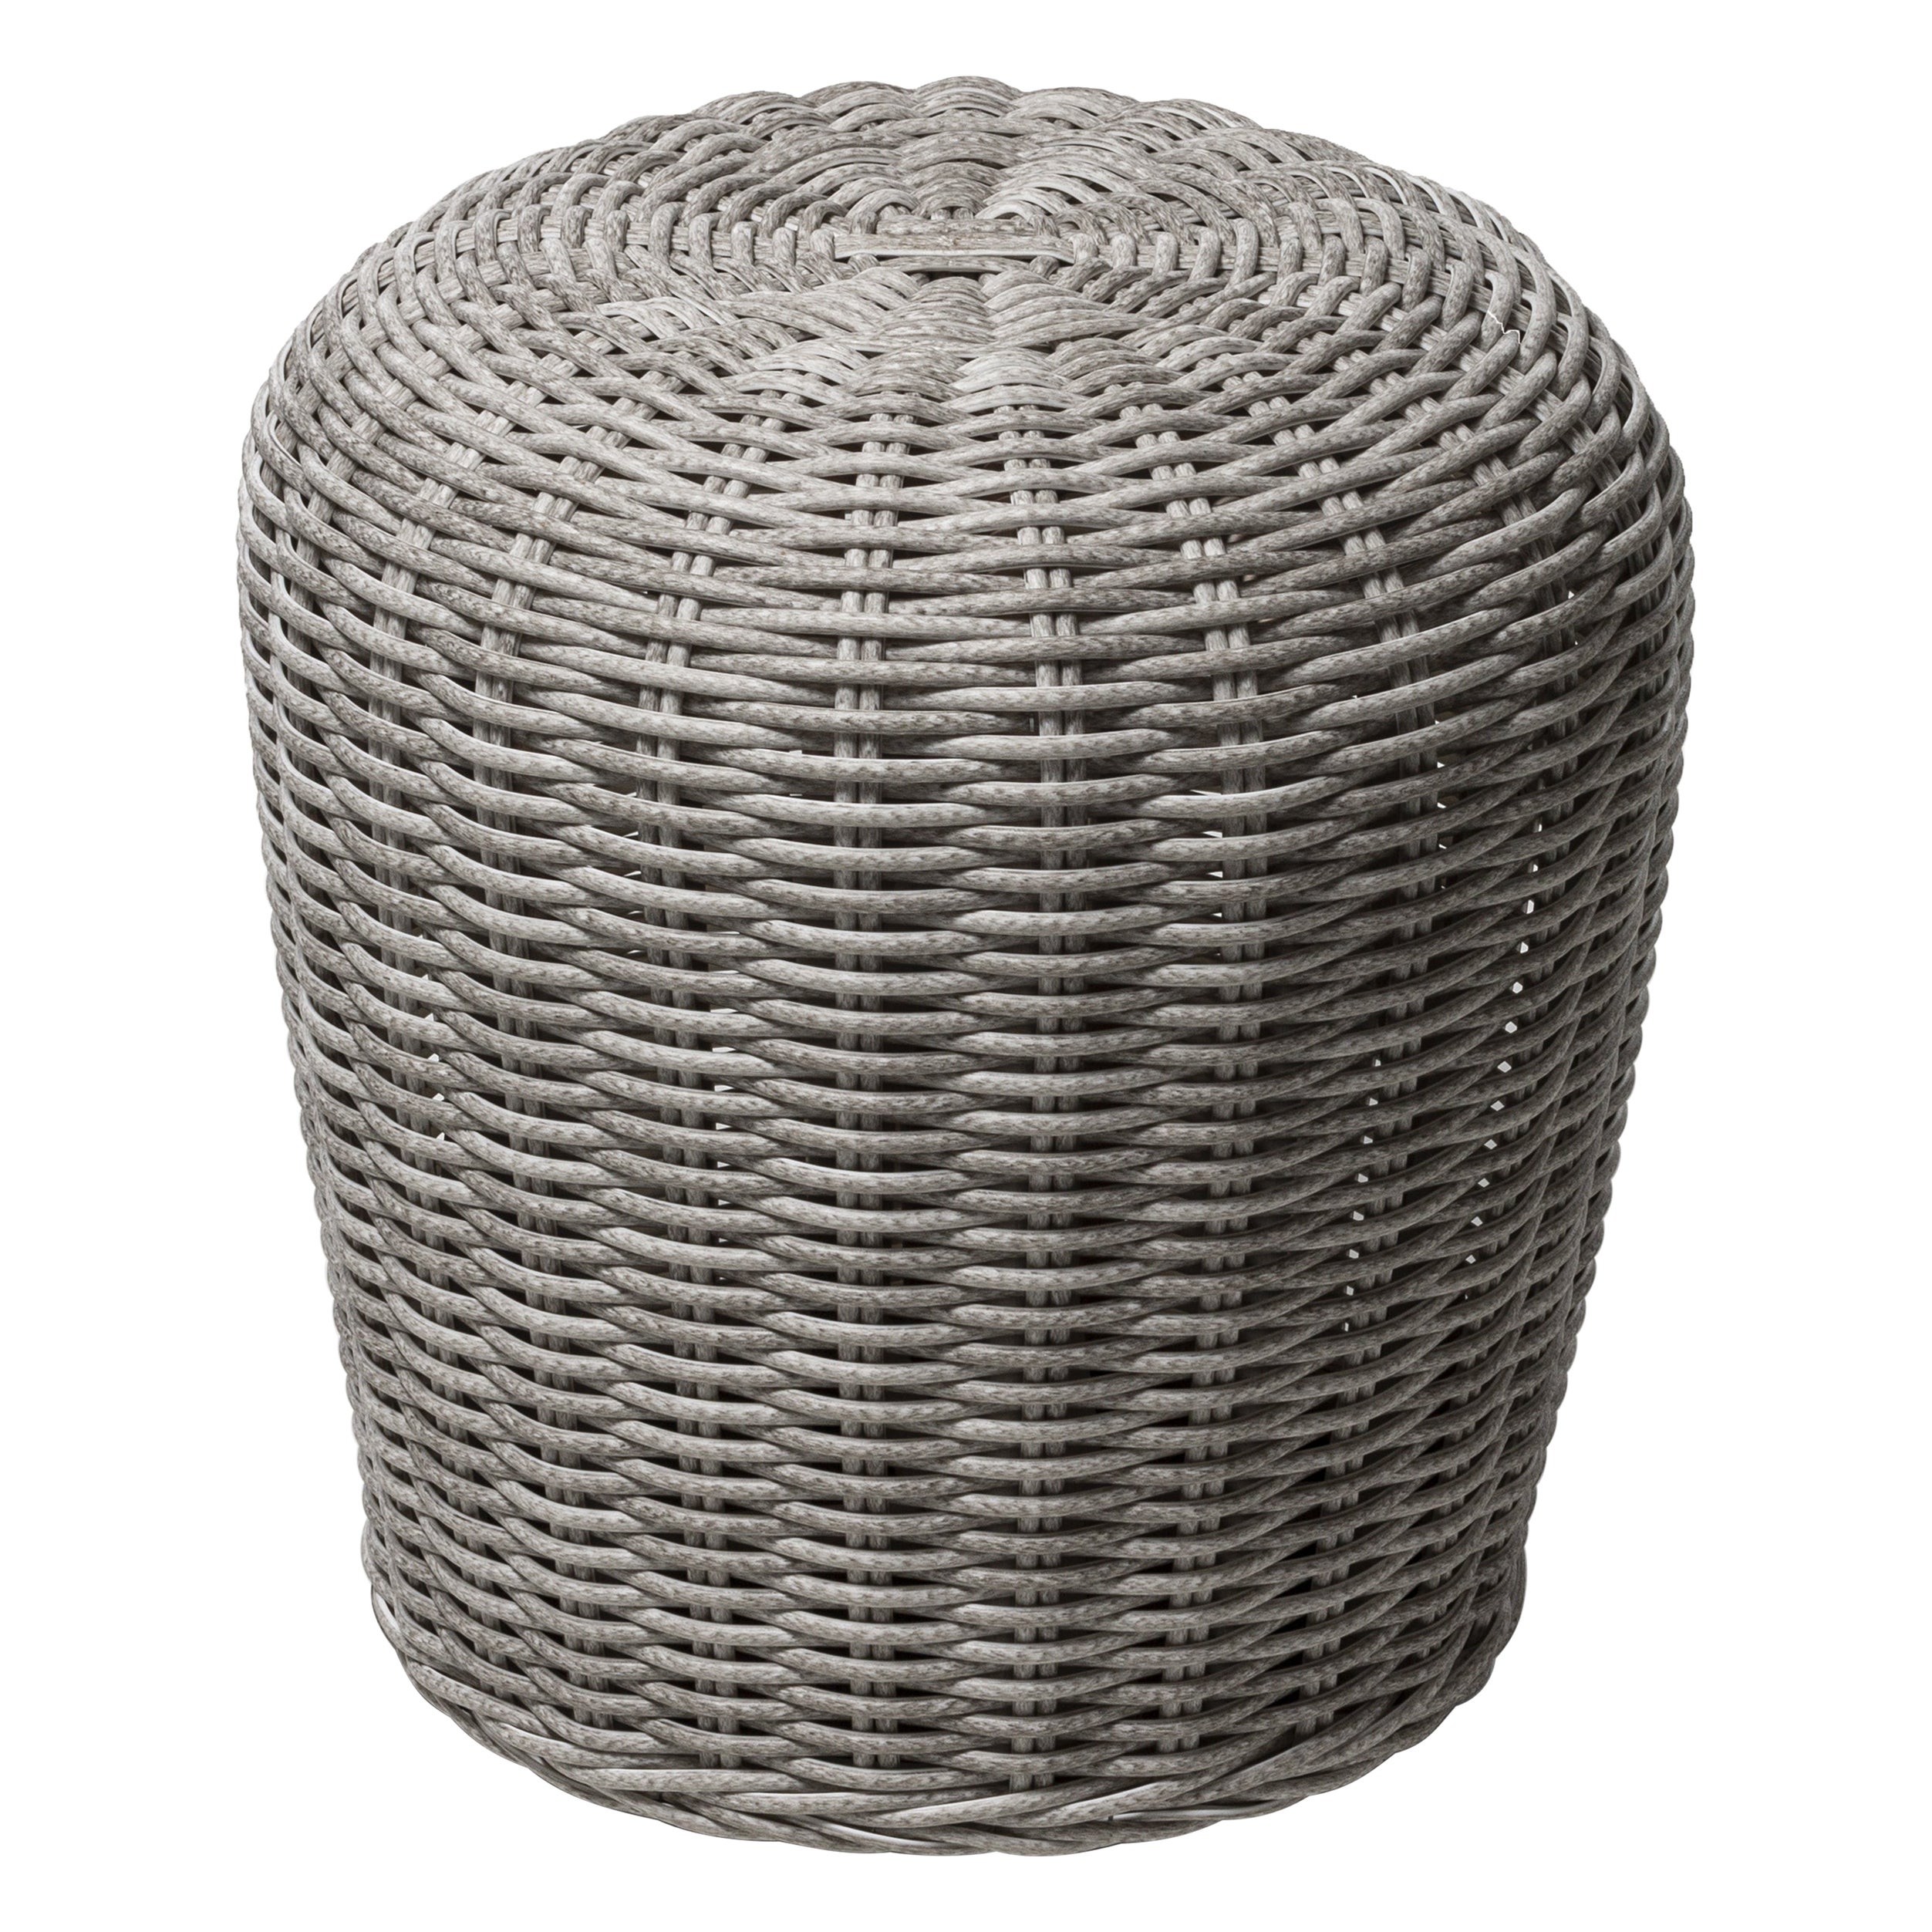 Gervasoni Panda Side Table in White/Gray Resin with Aluminium by Paola Navone